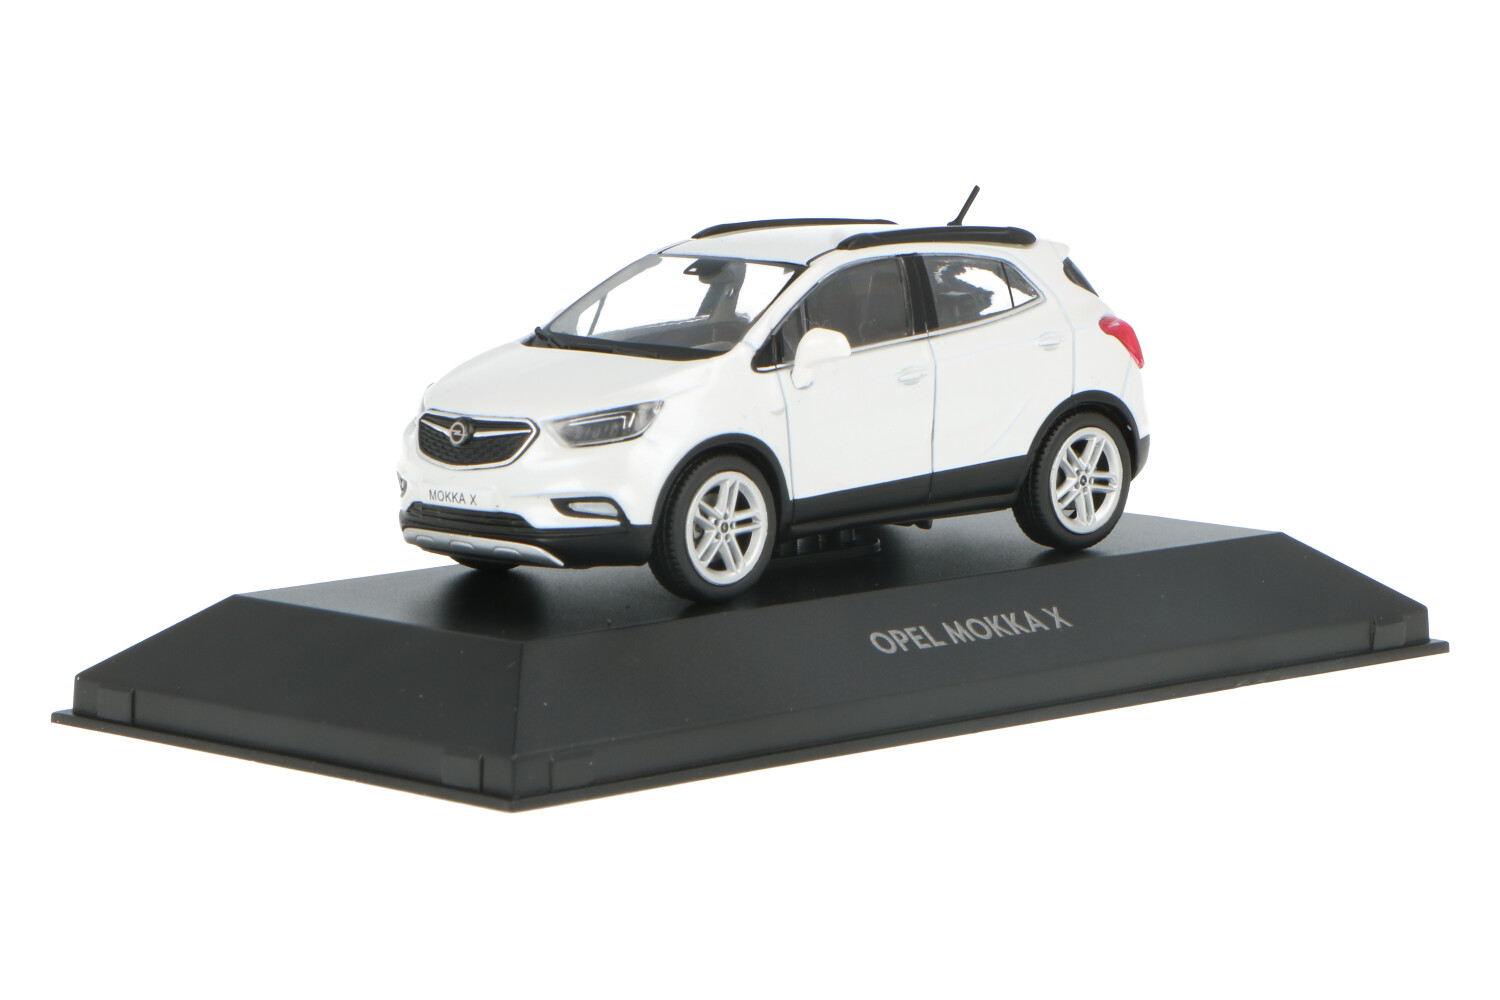 https://www.houseofmodelcars.com/images/Opel_Mokka_X_OC10921_1315OC10921Opel_Mokka_X_OC10921_Houseofmodelcars.jpg